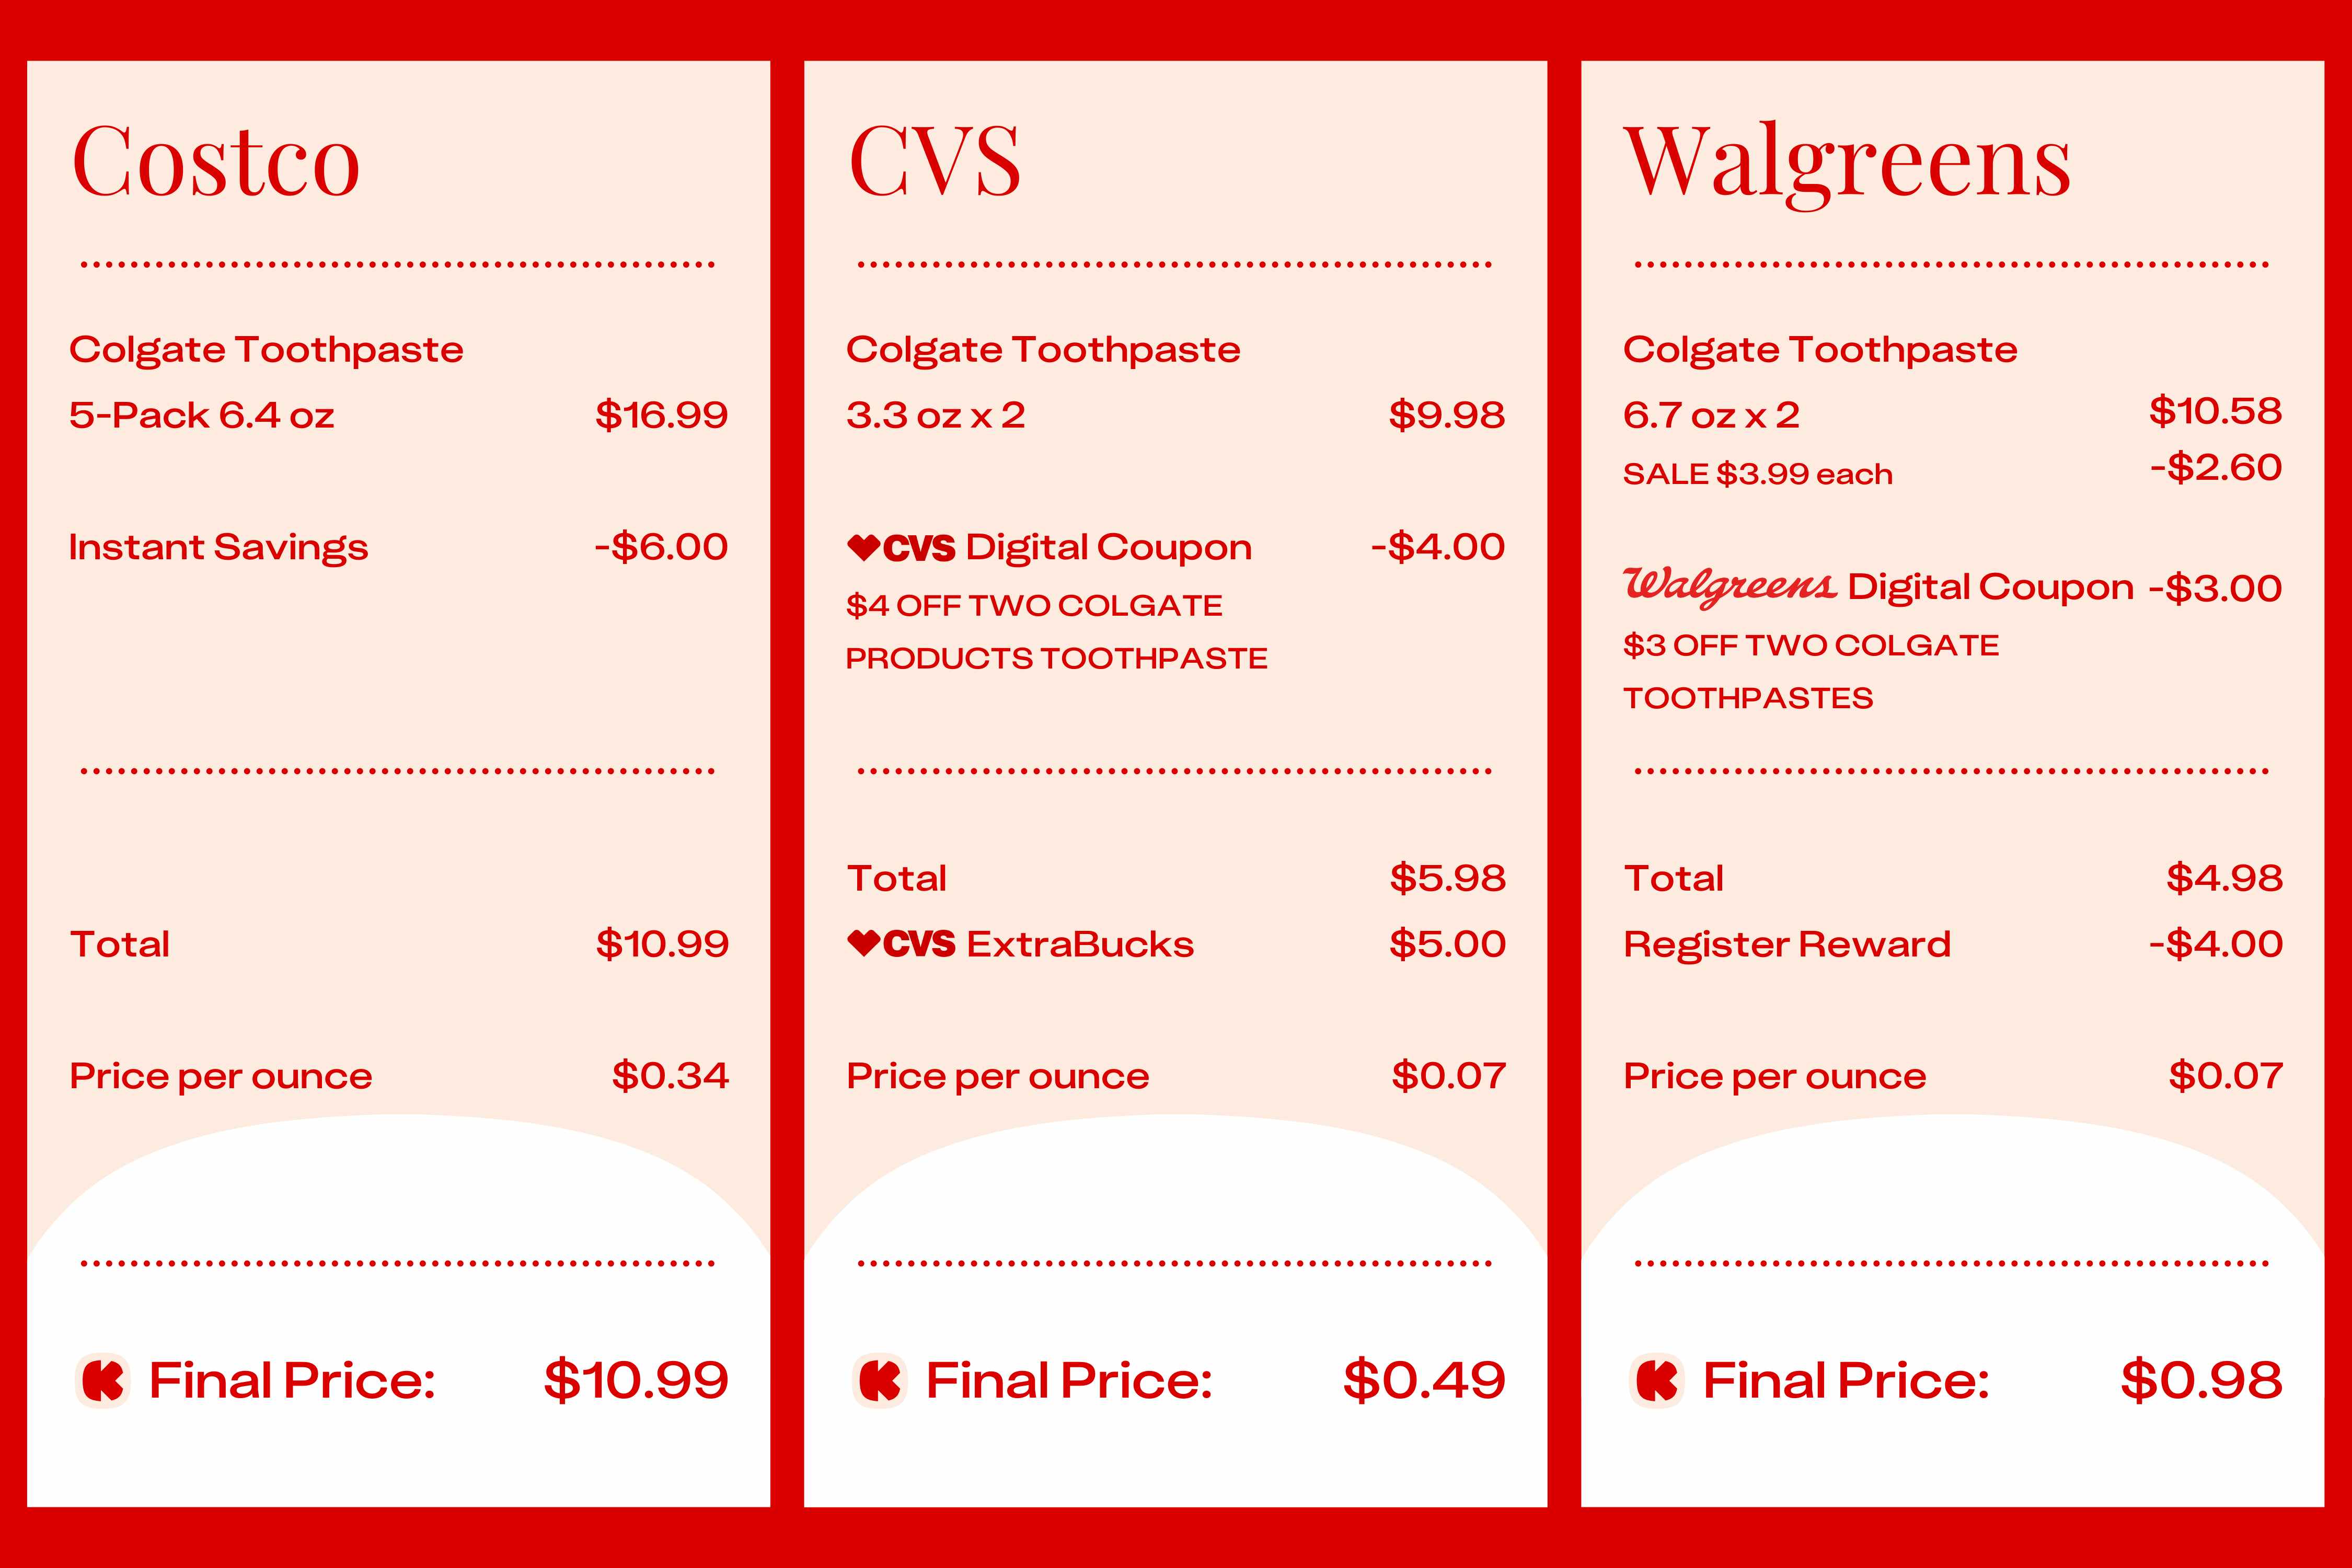 graphic of toothpaste costs at costco cvs and walgreens 